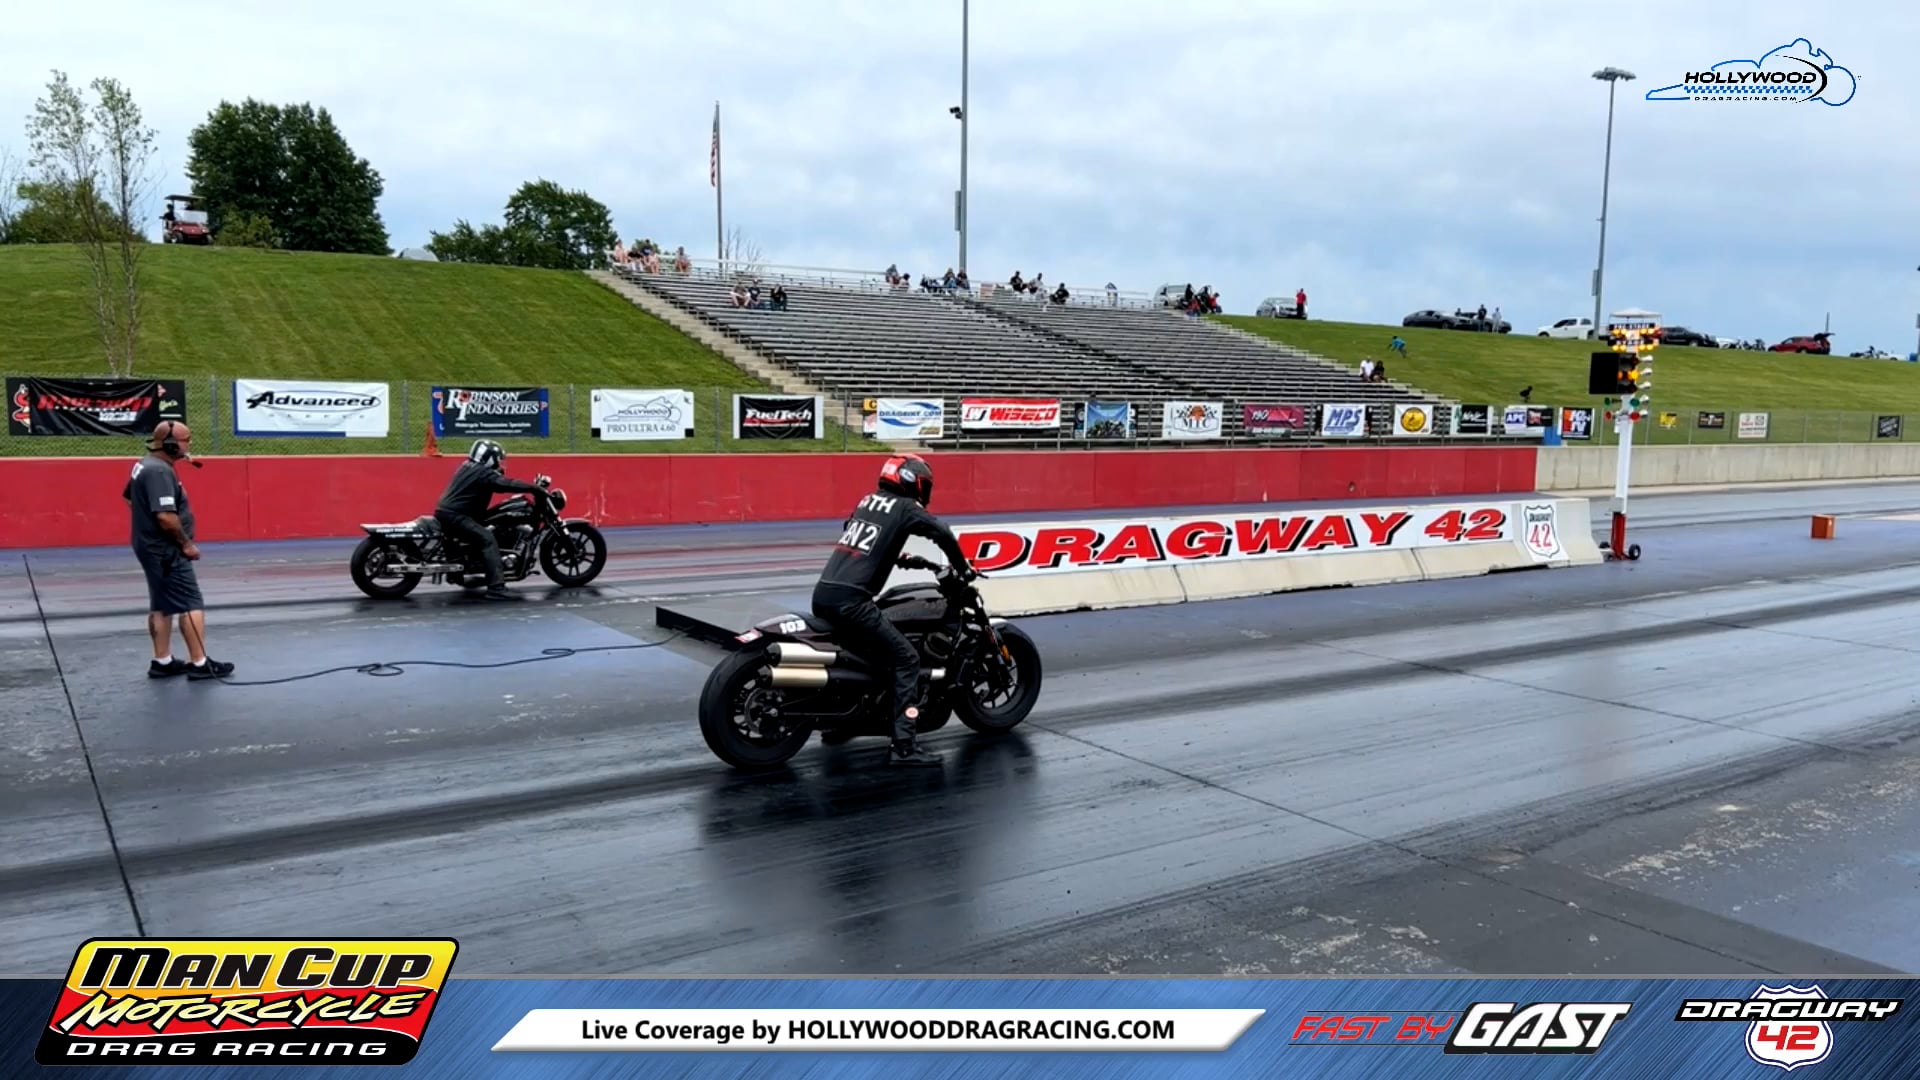 SUNDAY Man Cup Live Motorcycle Drag Racing From Dragway 42 Presented By Hollywood Drag Racing Live TV on Vimeo